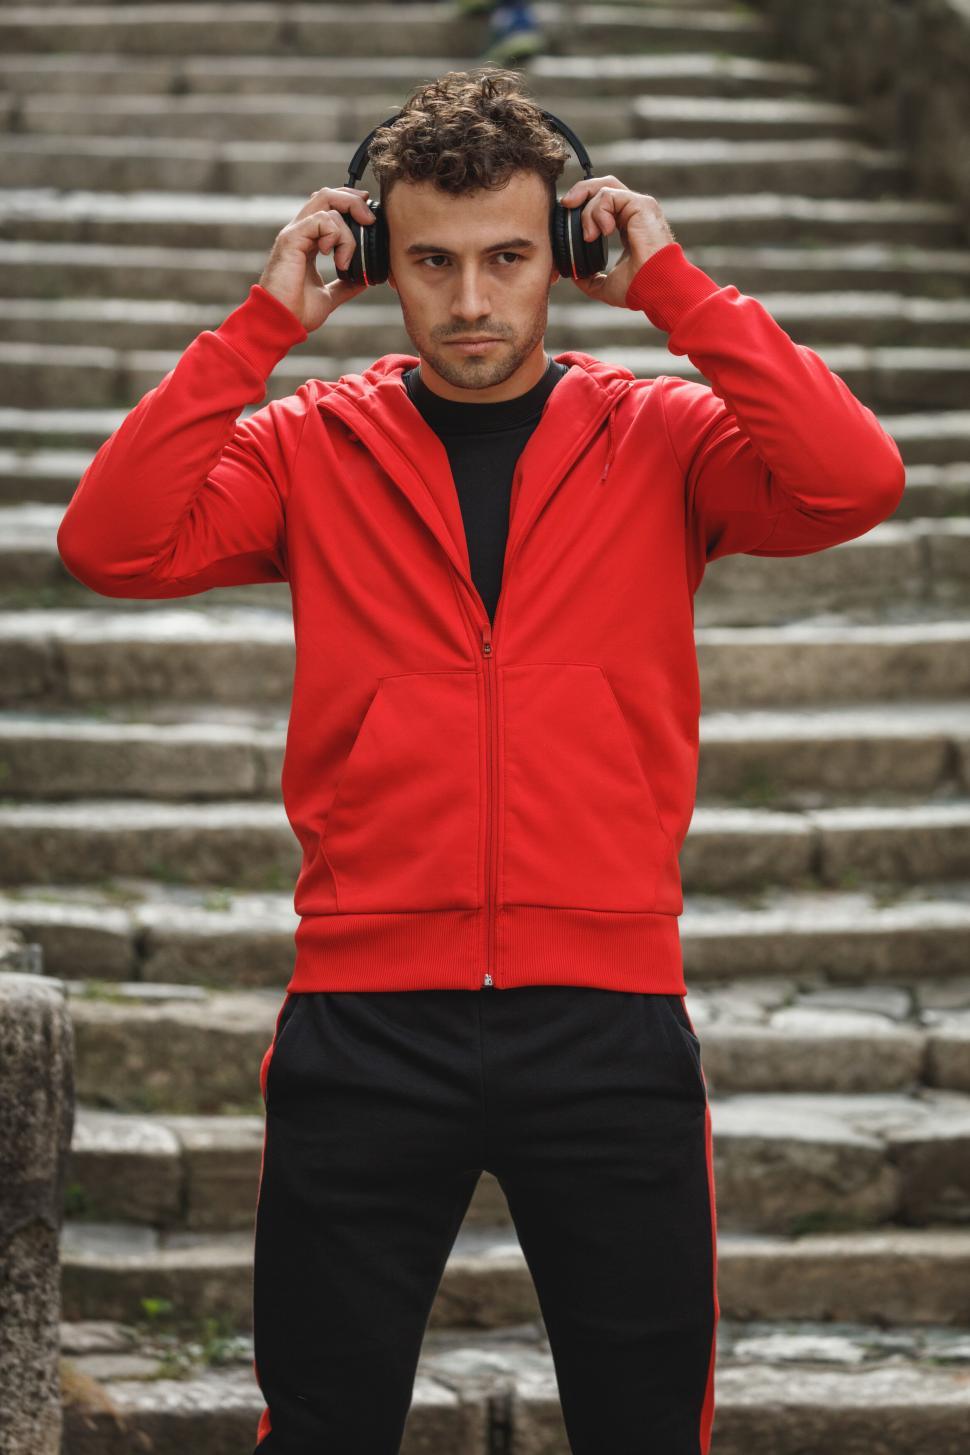 Free Image of Man in red jacket with headphones outdoors 